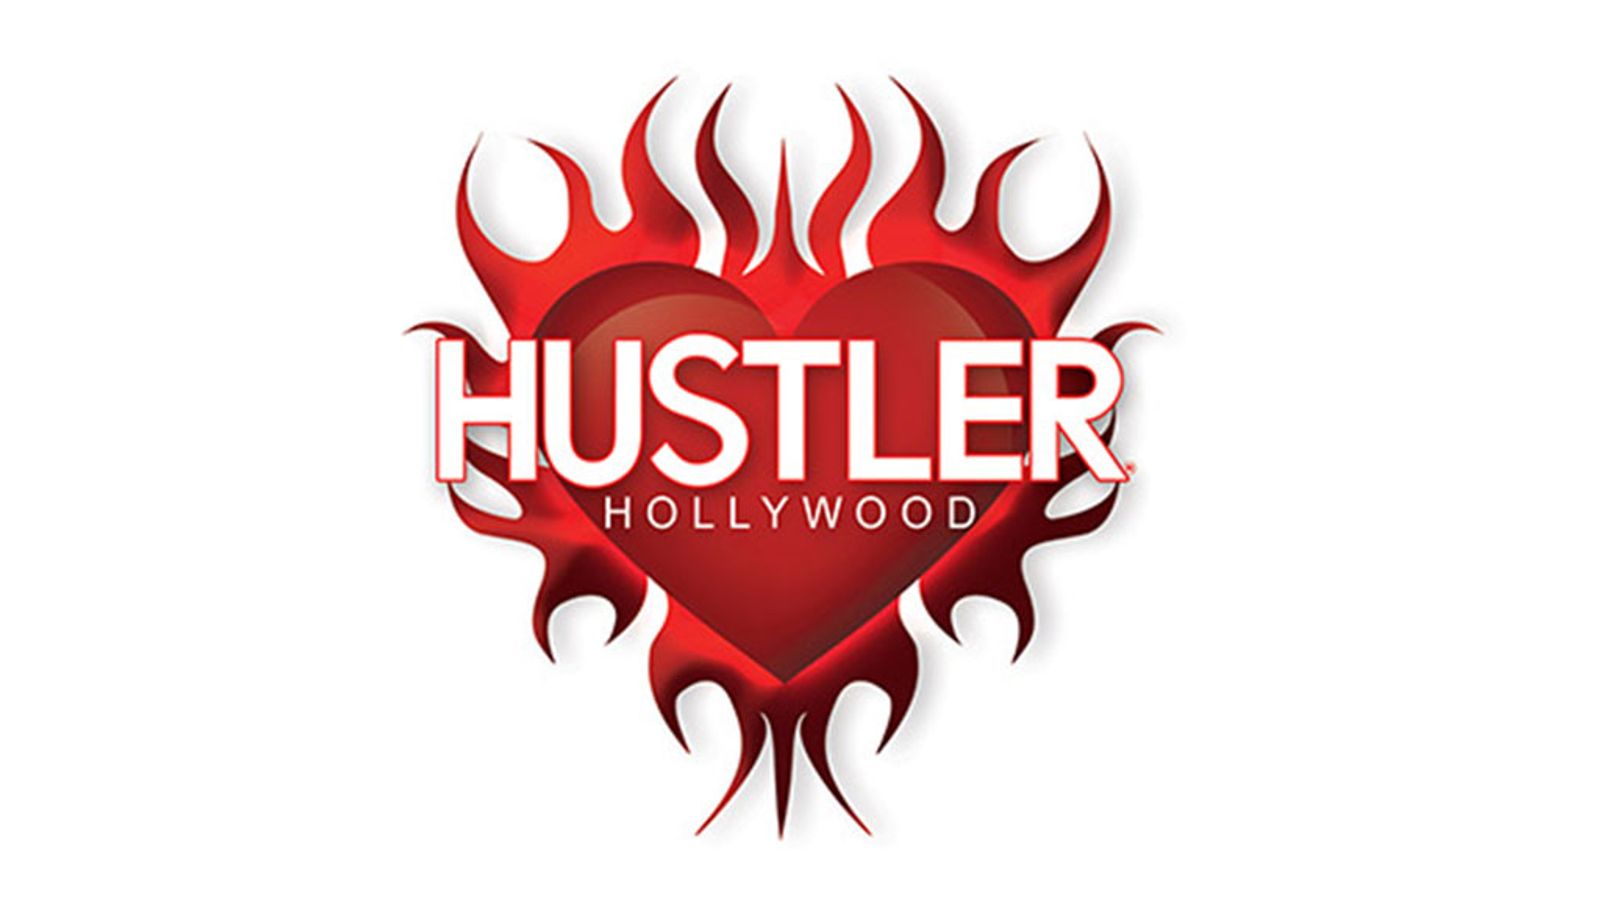 Hustler Hollywood Ohio Boutiques Offer In-Store, Curbside Service